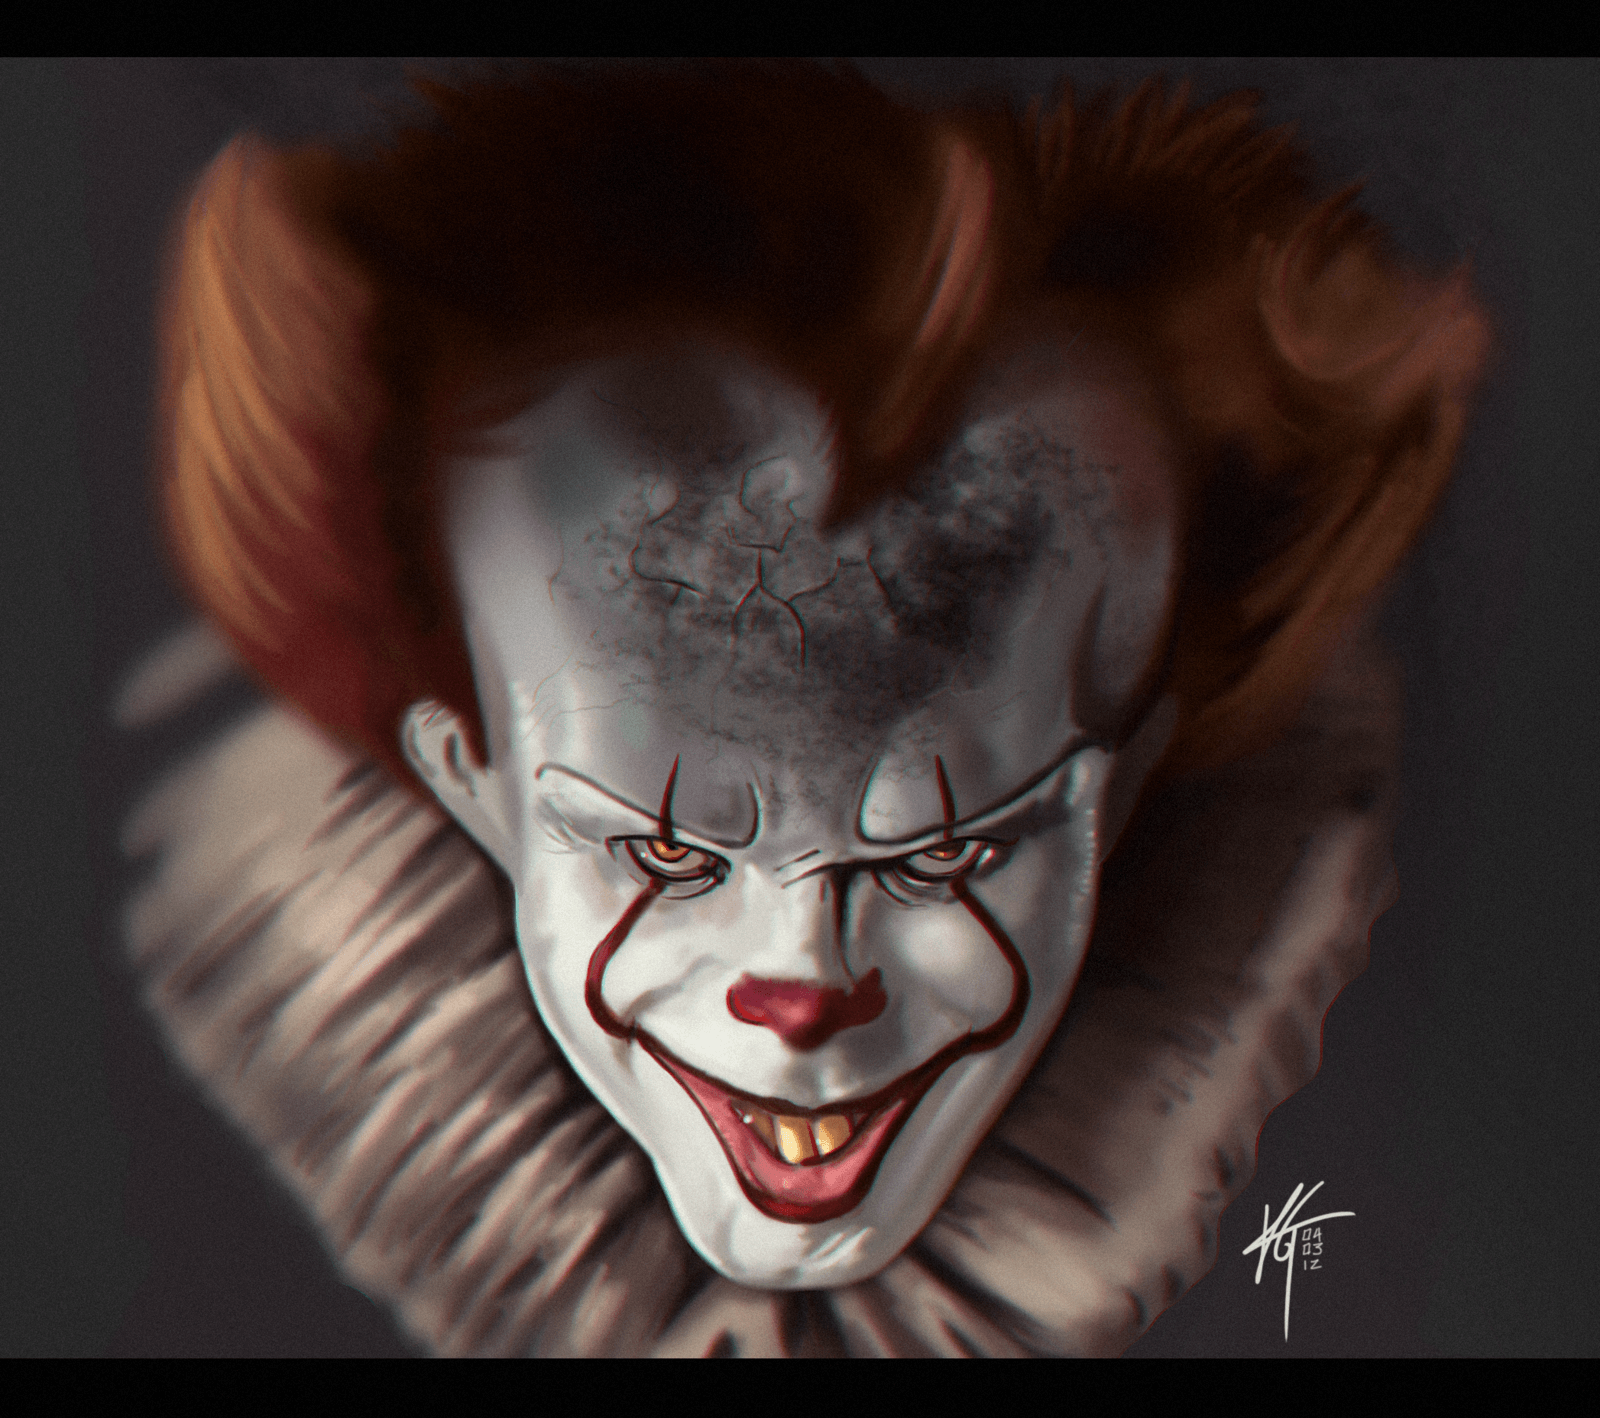 IT The Dancing Clown By KxG WitcheR